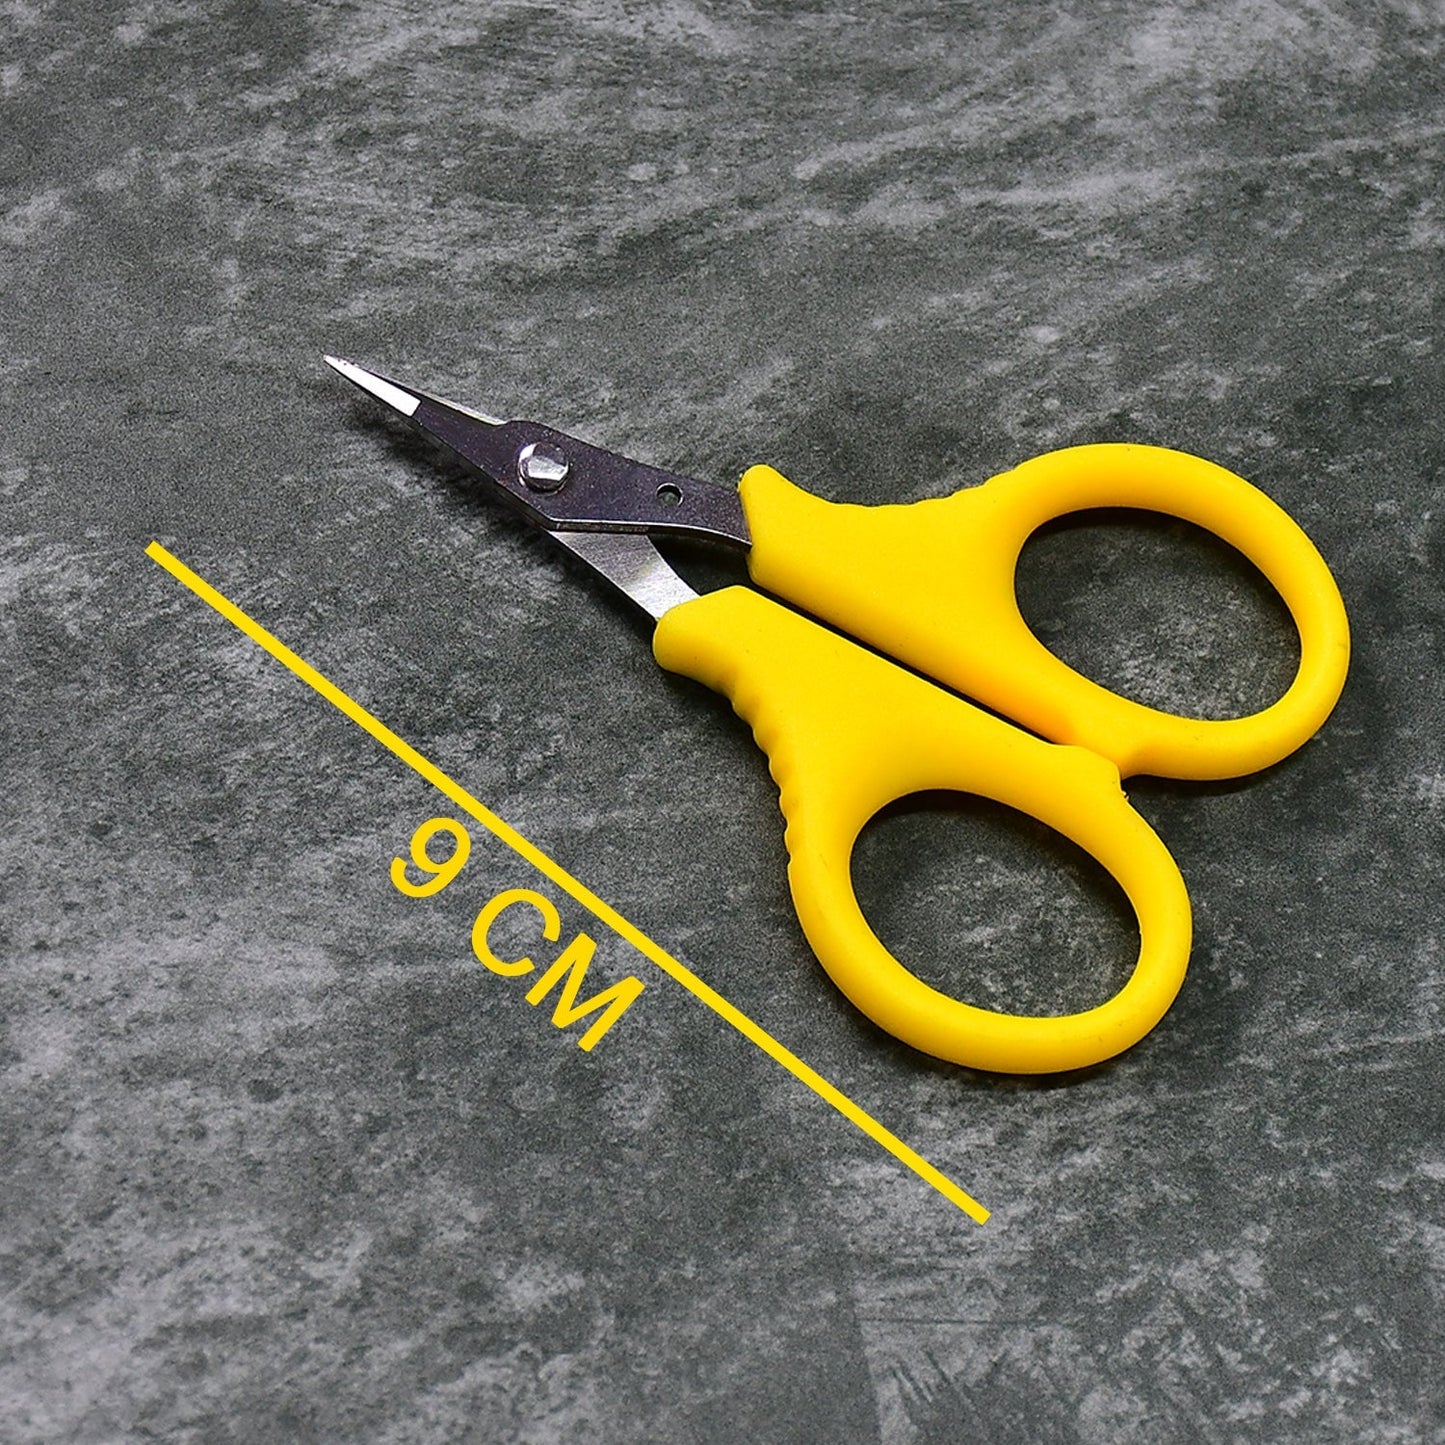 9112 Multipurpose Scissors Comfort Grip Handles Used in Home and Office. DukanDaily